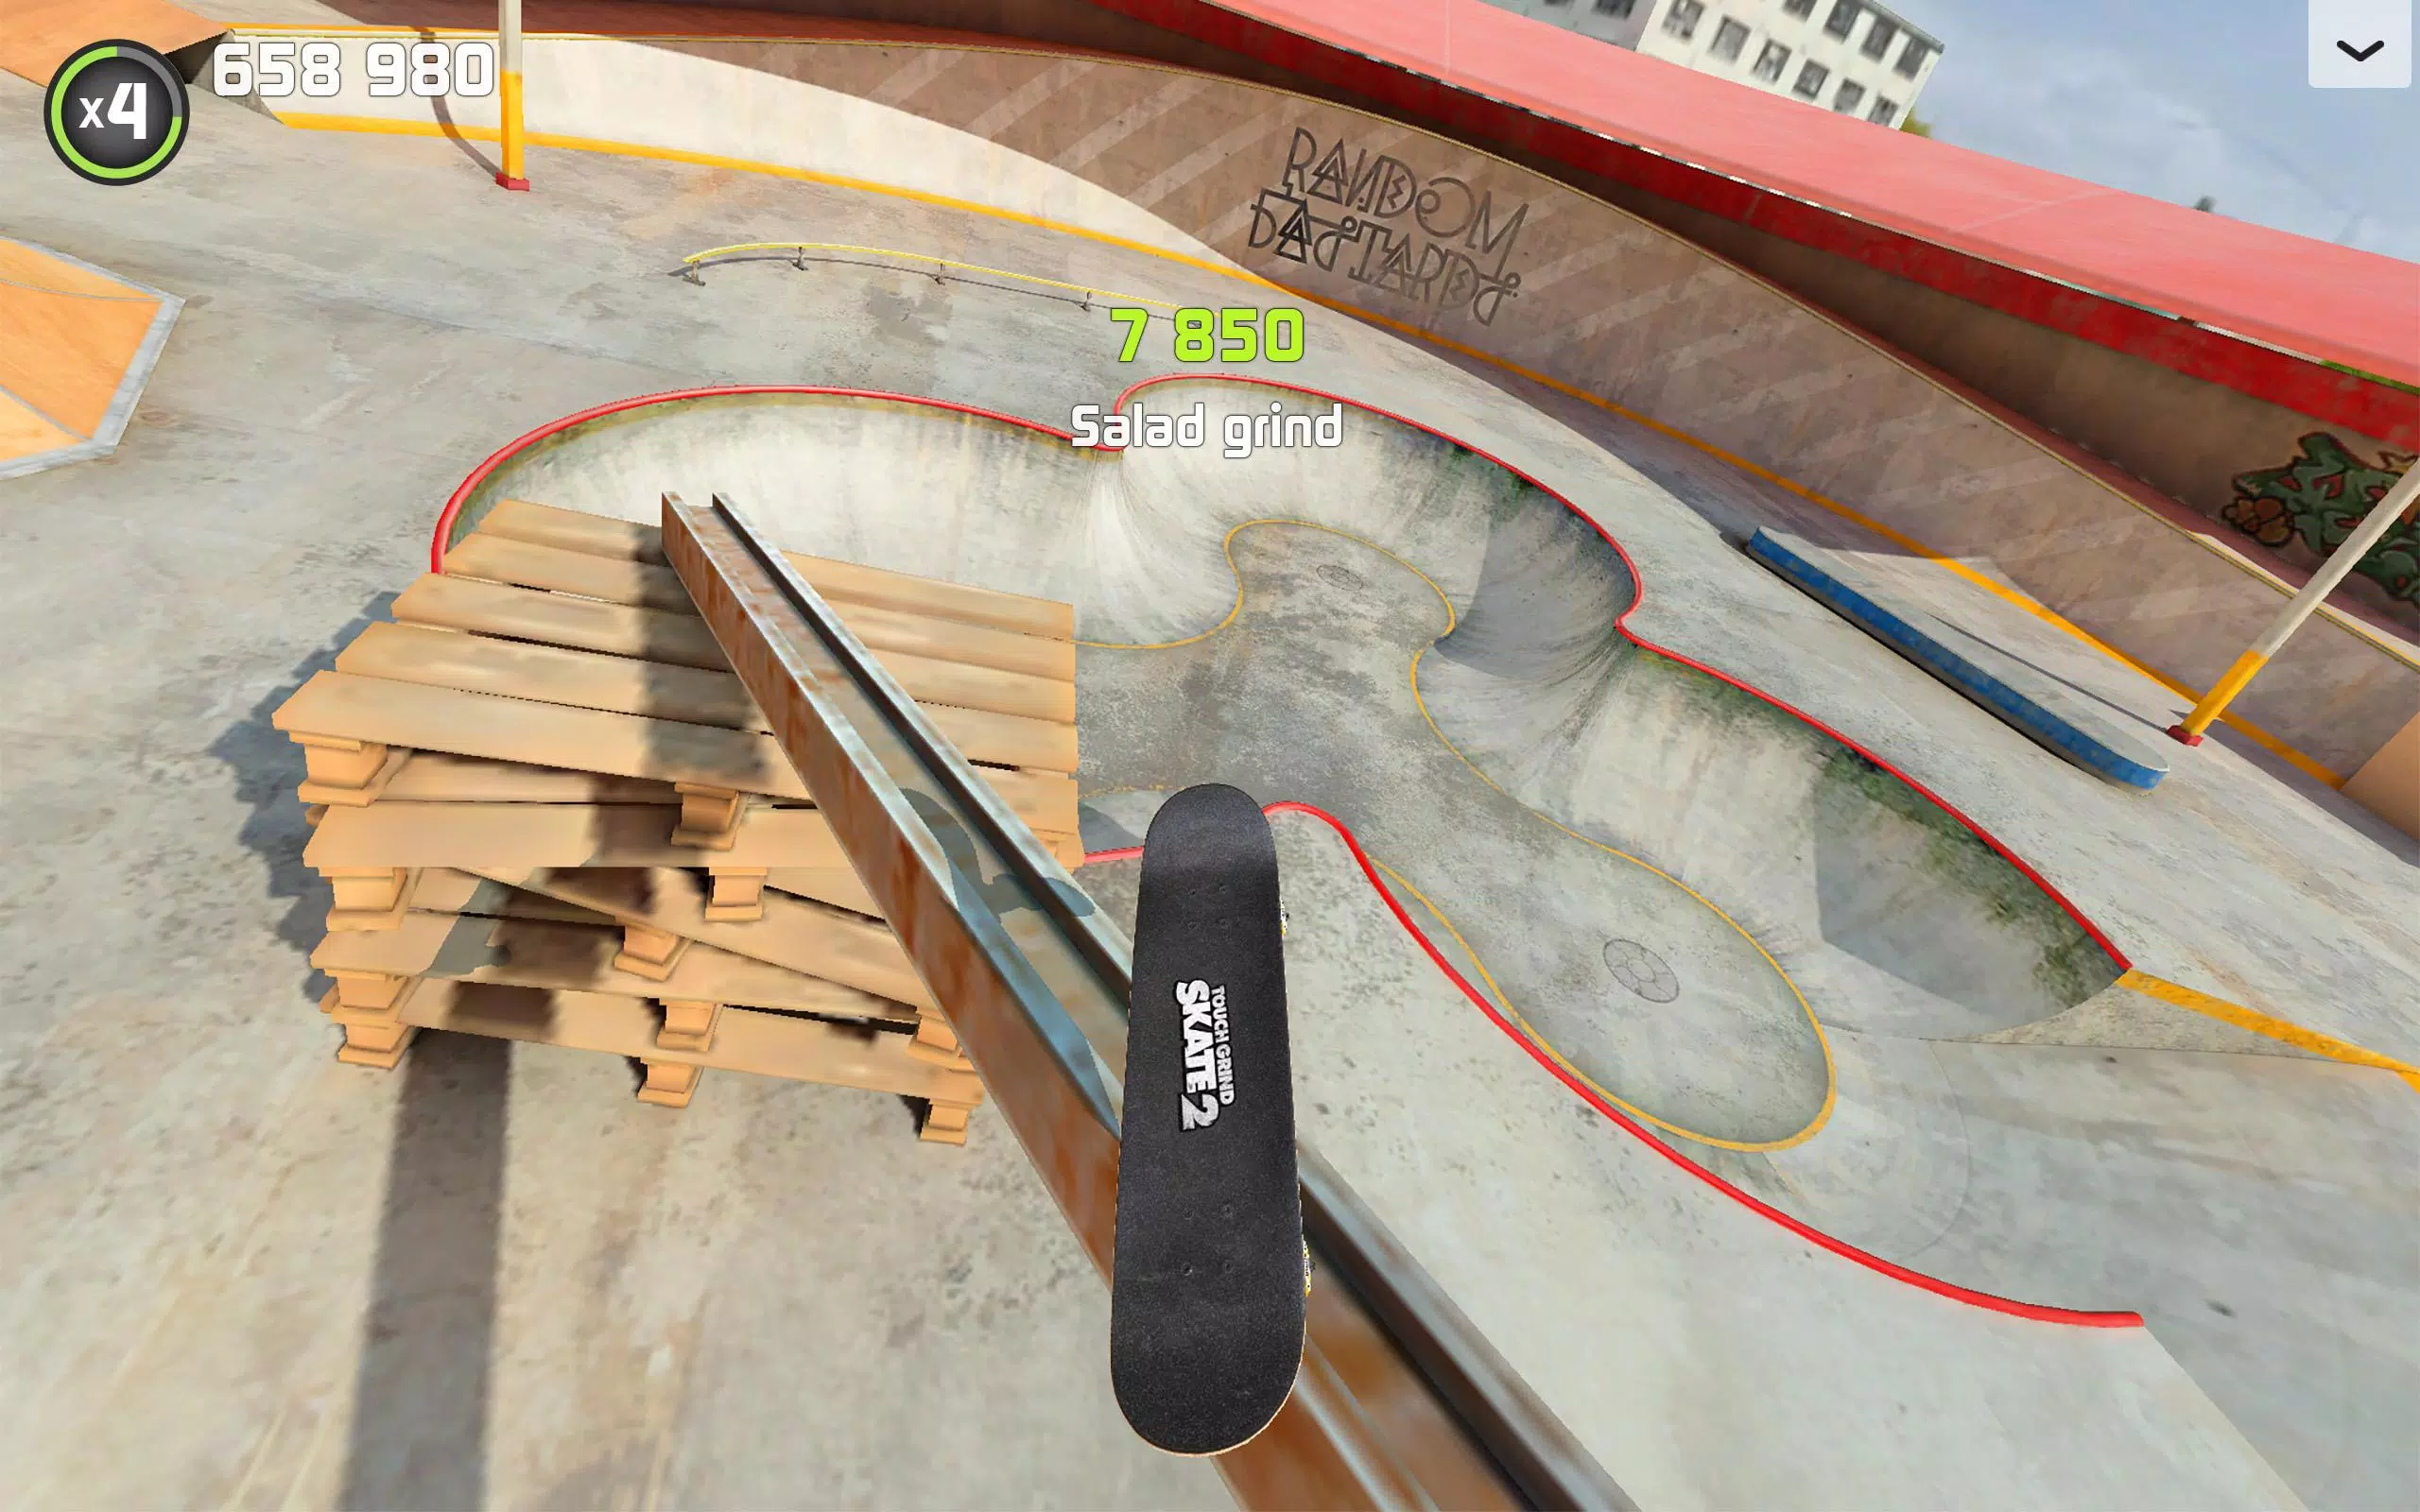 Touchgrind Skate 2 APK for Android Download